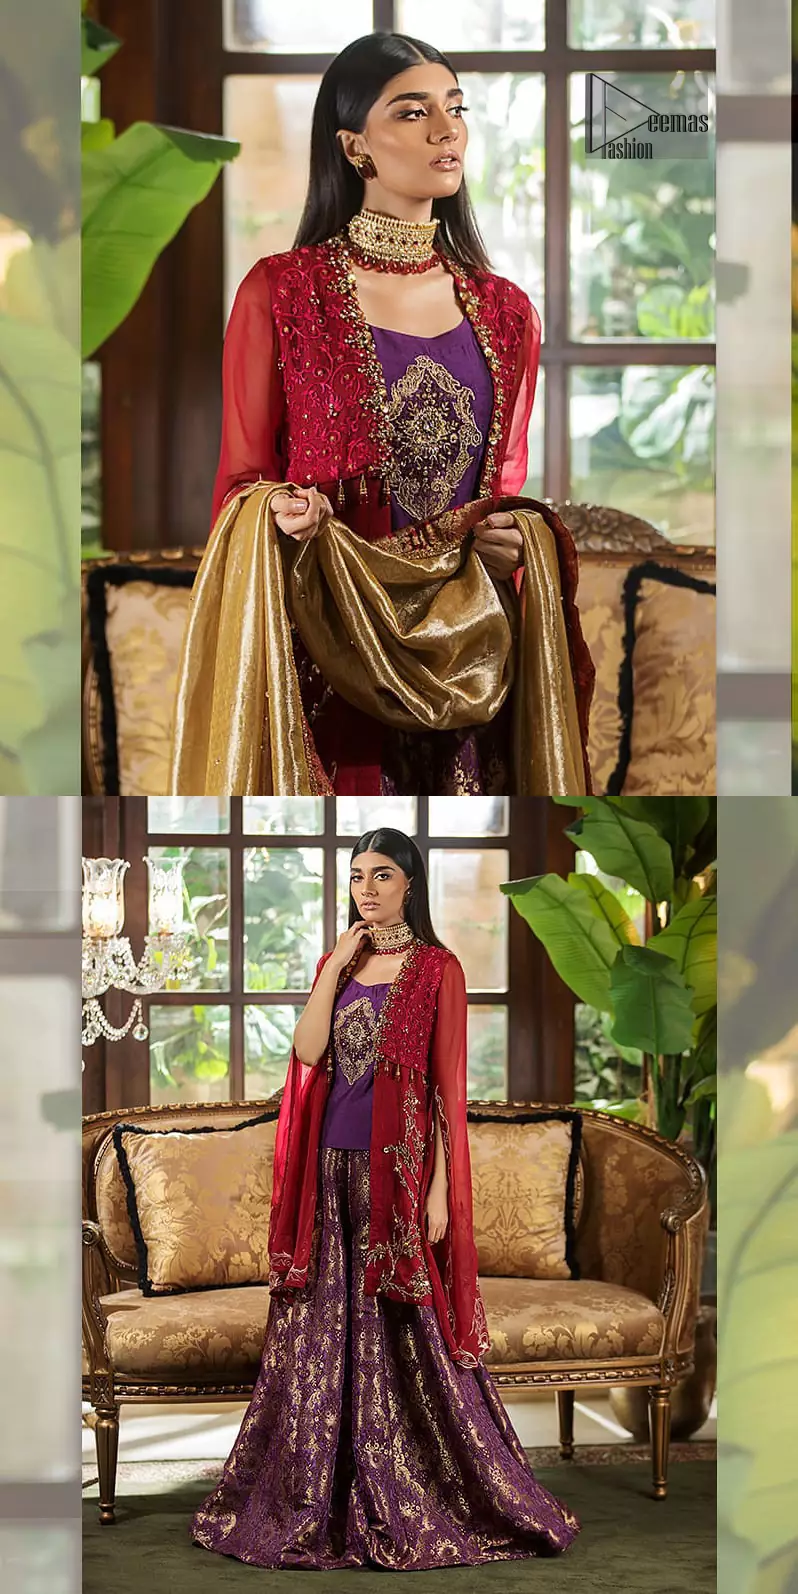 Tradition meets modernity. Boost your confidence and style in this glamorous attire accentuated with finest zardosi work, stunningly perfect for any evening ensemle. Short shirt is ornamented with a large motif in the center done with antique shaded kora, dabka, tilla and sequins. Pair it up with deep red gown beautifully adorned with floral thread embroidery on the bodice and finishing with tassels. Furthermore it is highlighted with floral bootis. Finish the look with brocade sharara. It is comprises with golden brocade dupatta having embellished red applique on all four sides.